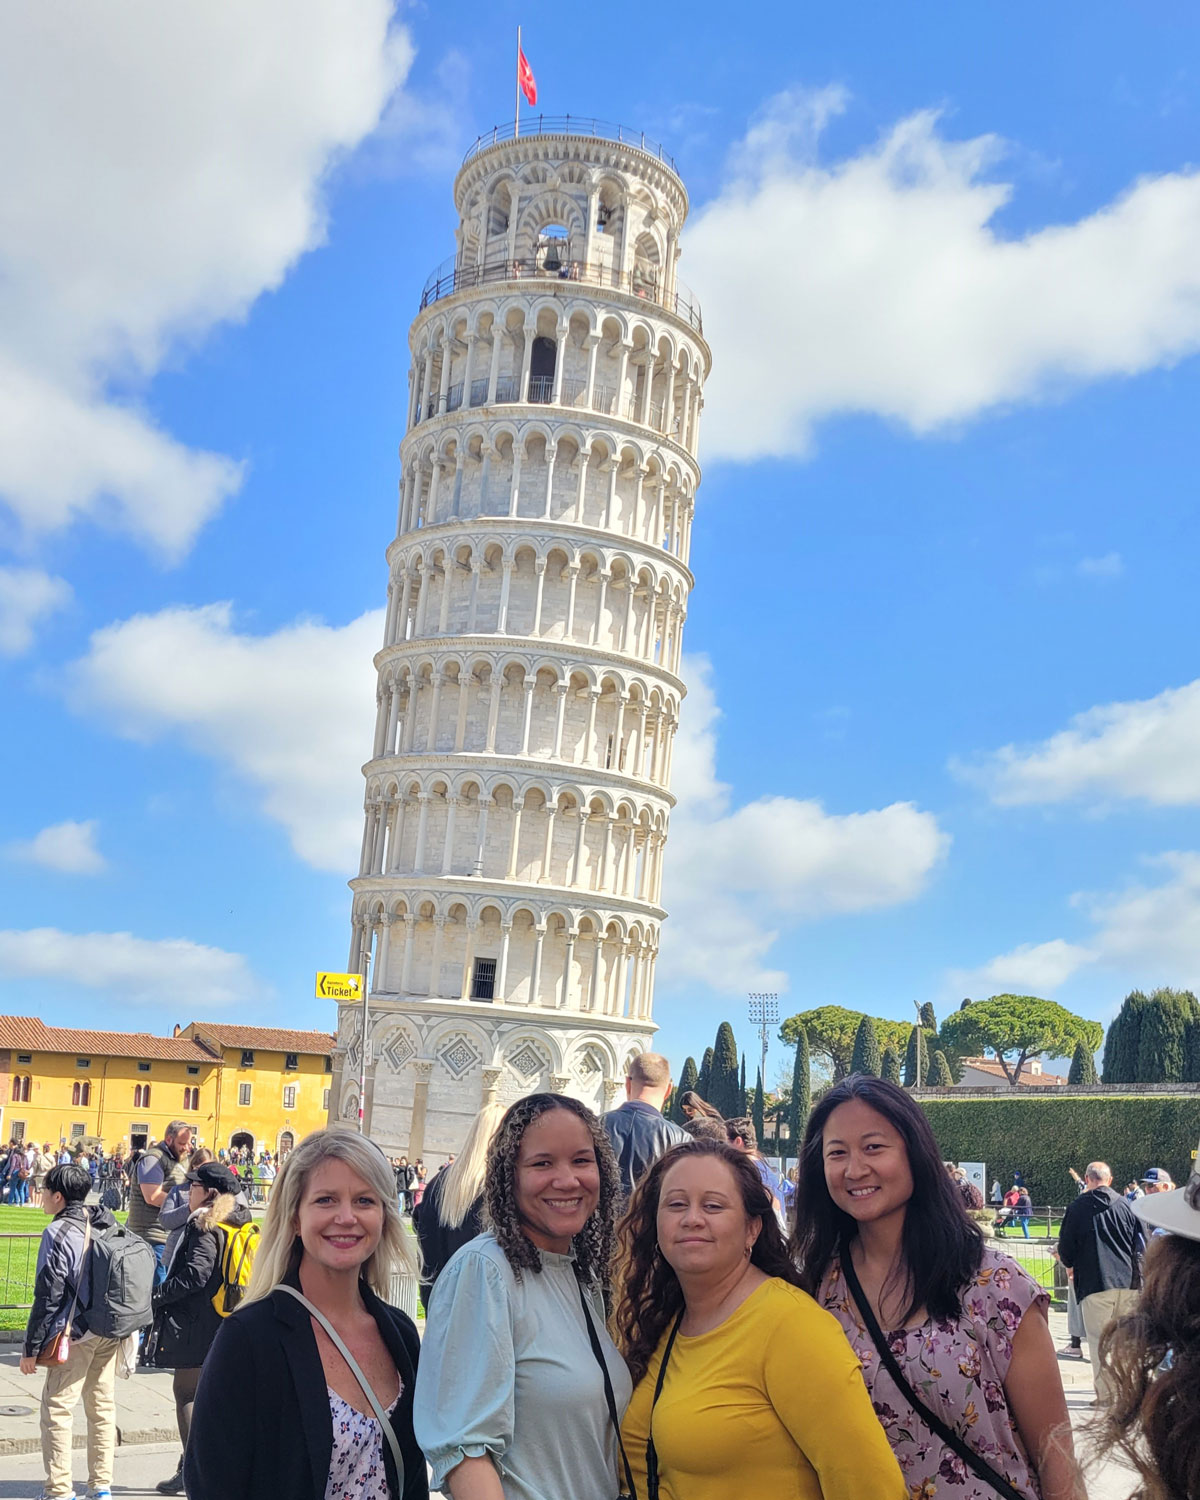 Teachers standing in front of the Leaning Tower of Pisa